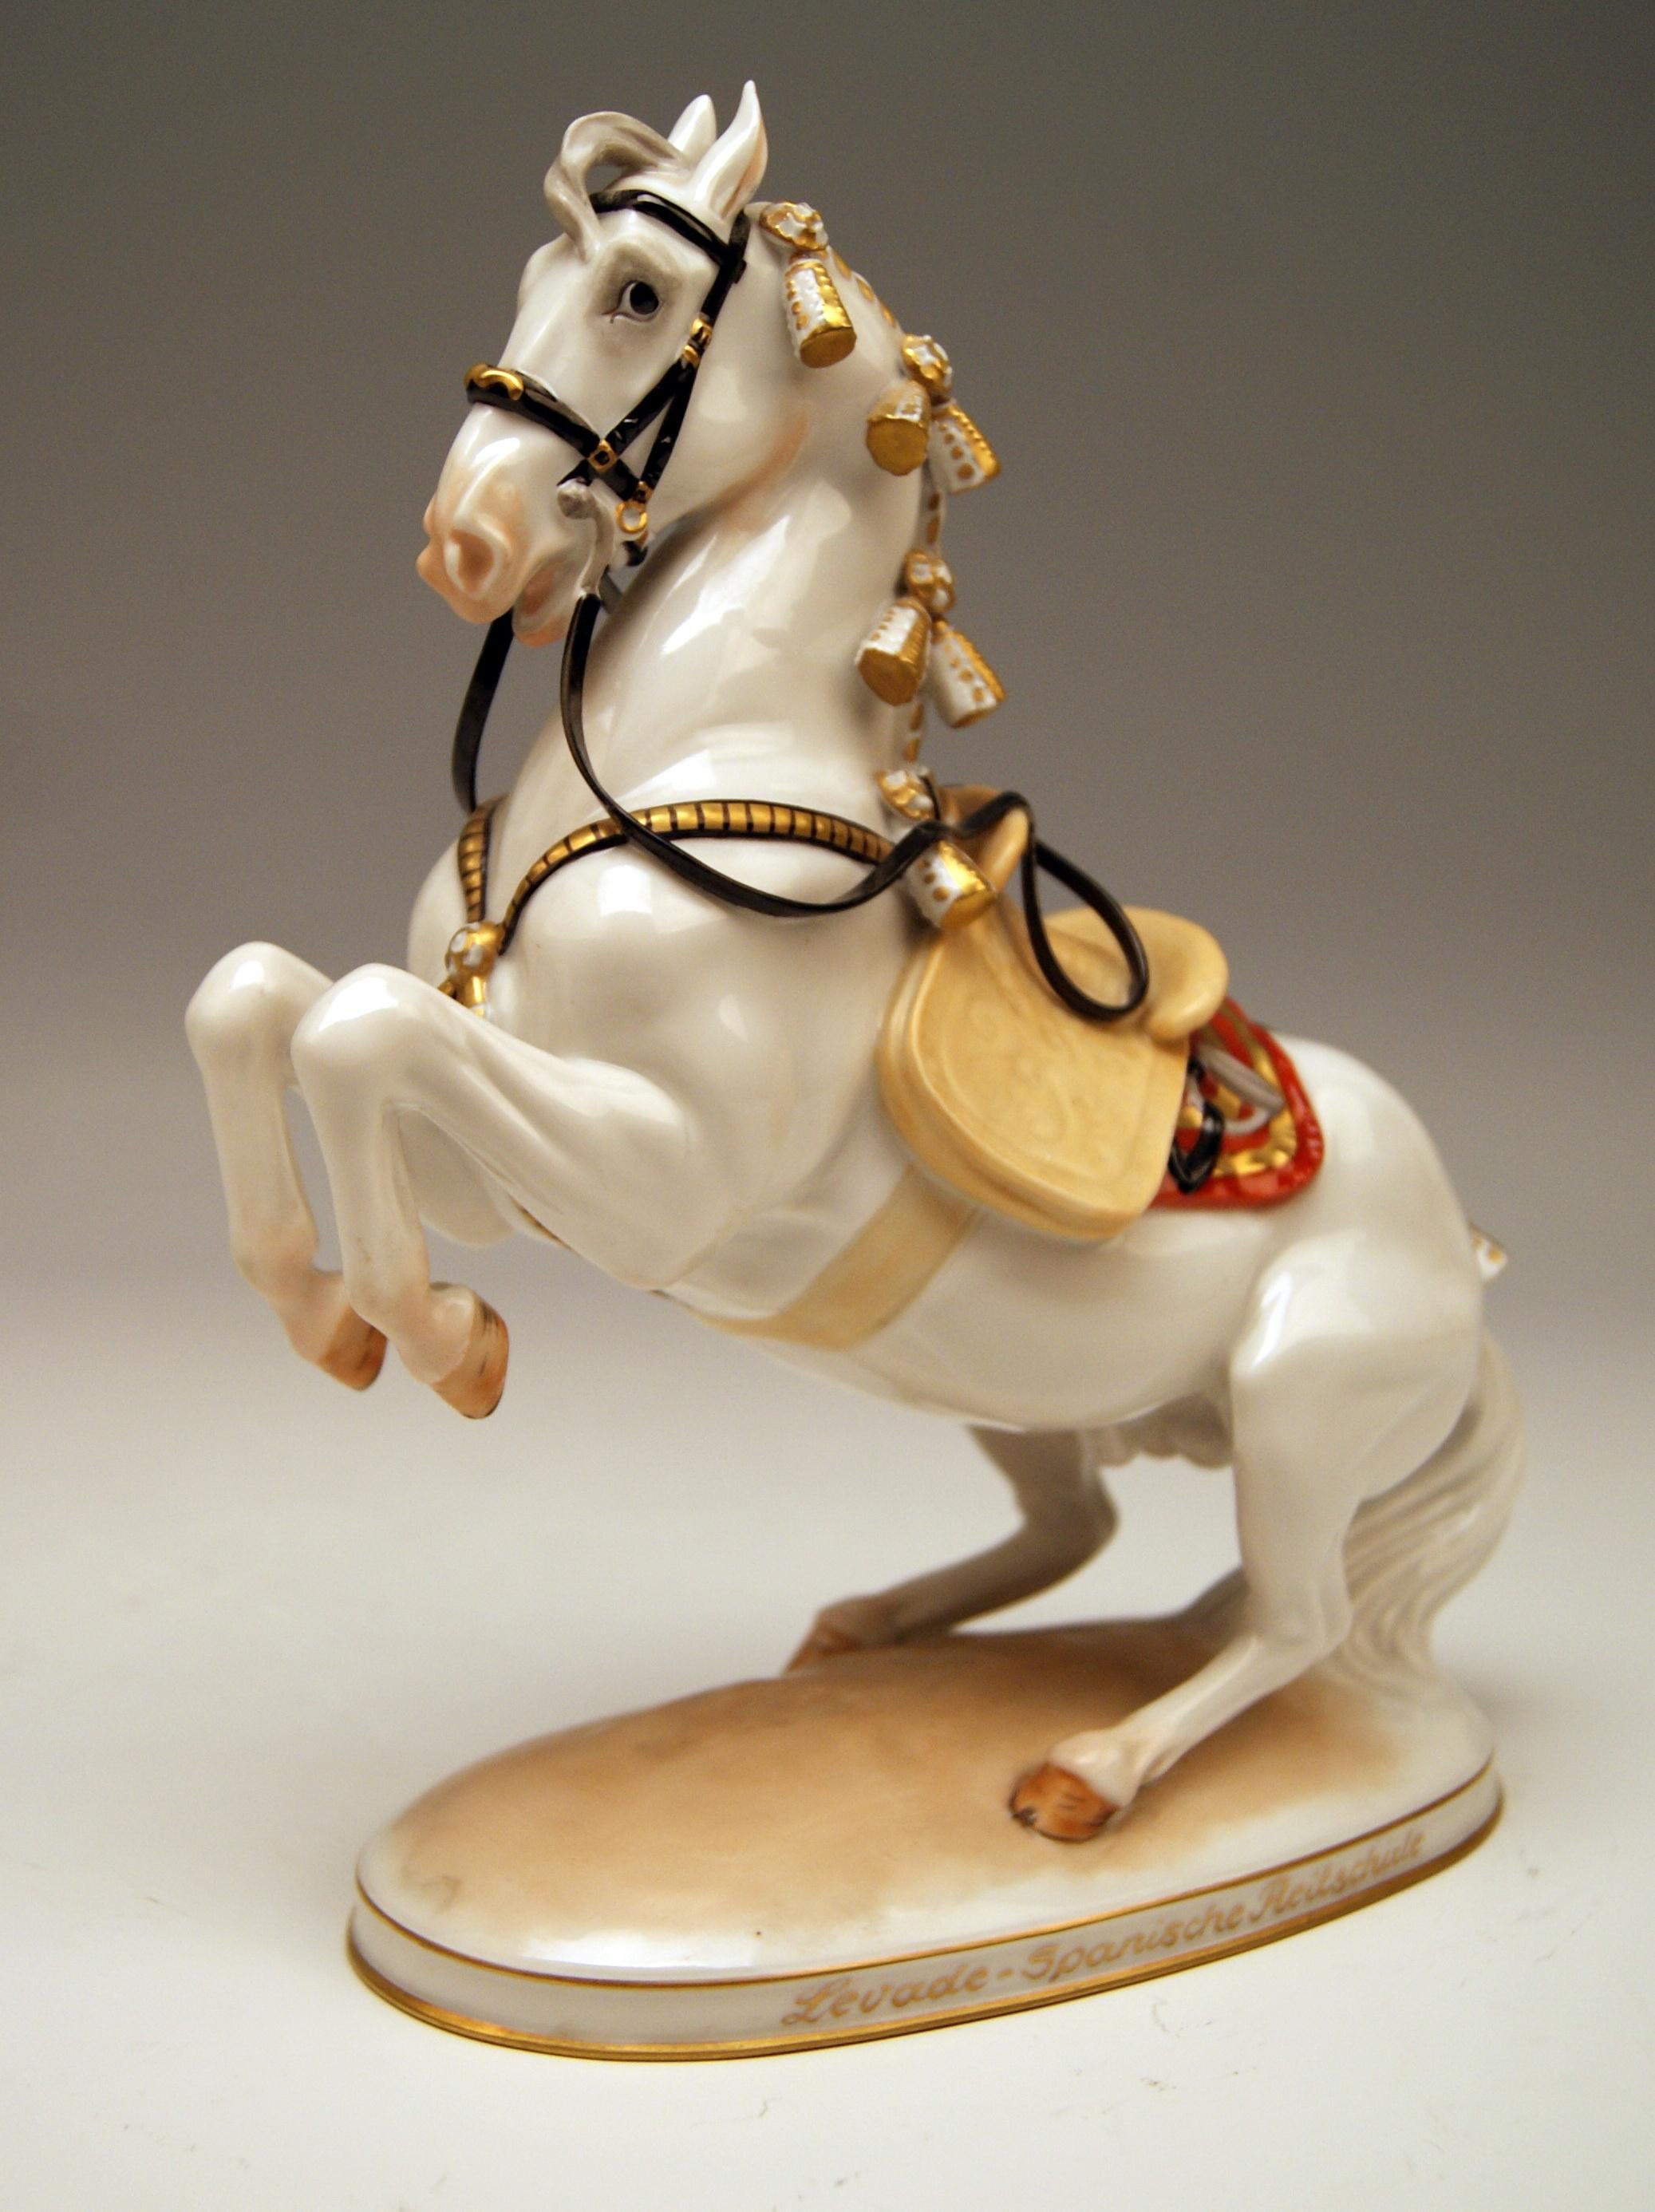 Vienna Augarten horse Spanish riding school
Figurine type: Levade

The jumping horse depicts a figurine which is called 'Levade' : The Levade (French: se lever = to rise) is an exercise of the classical school of riding where the horse has to jump